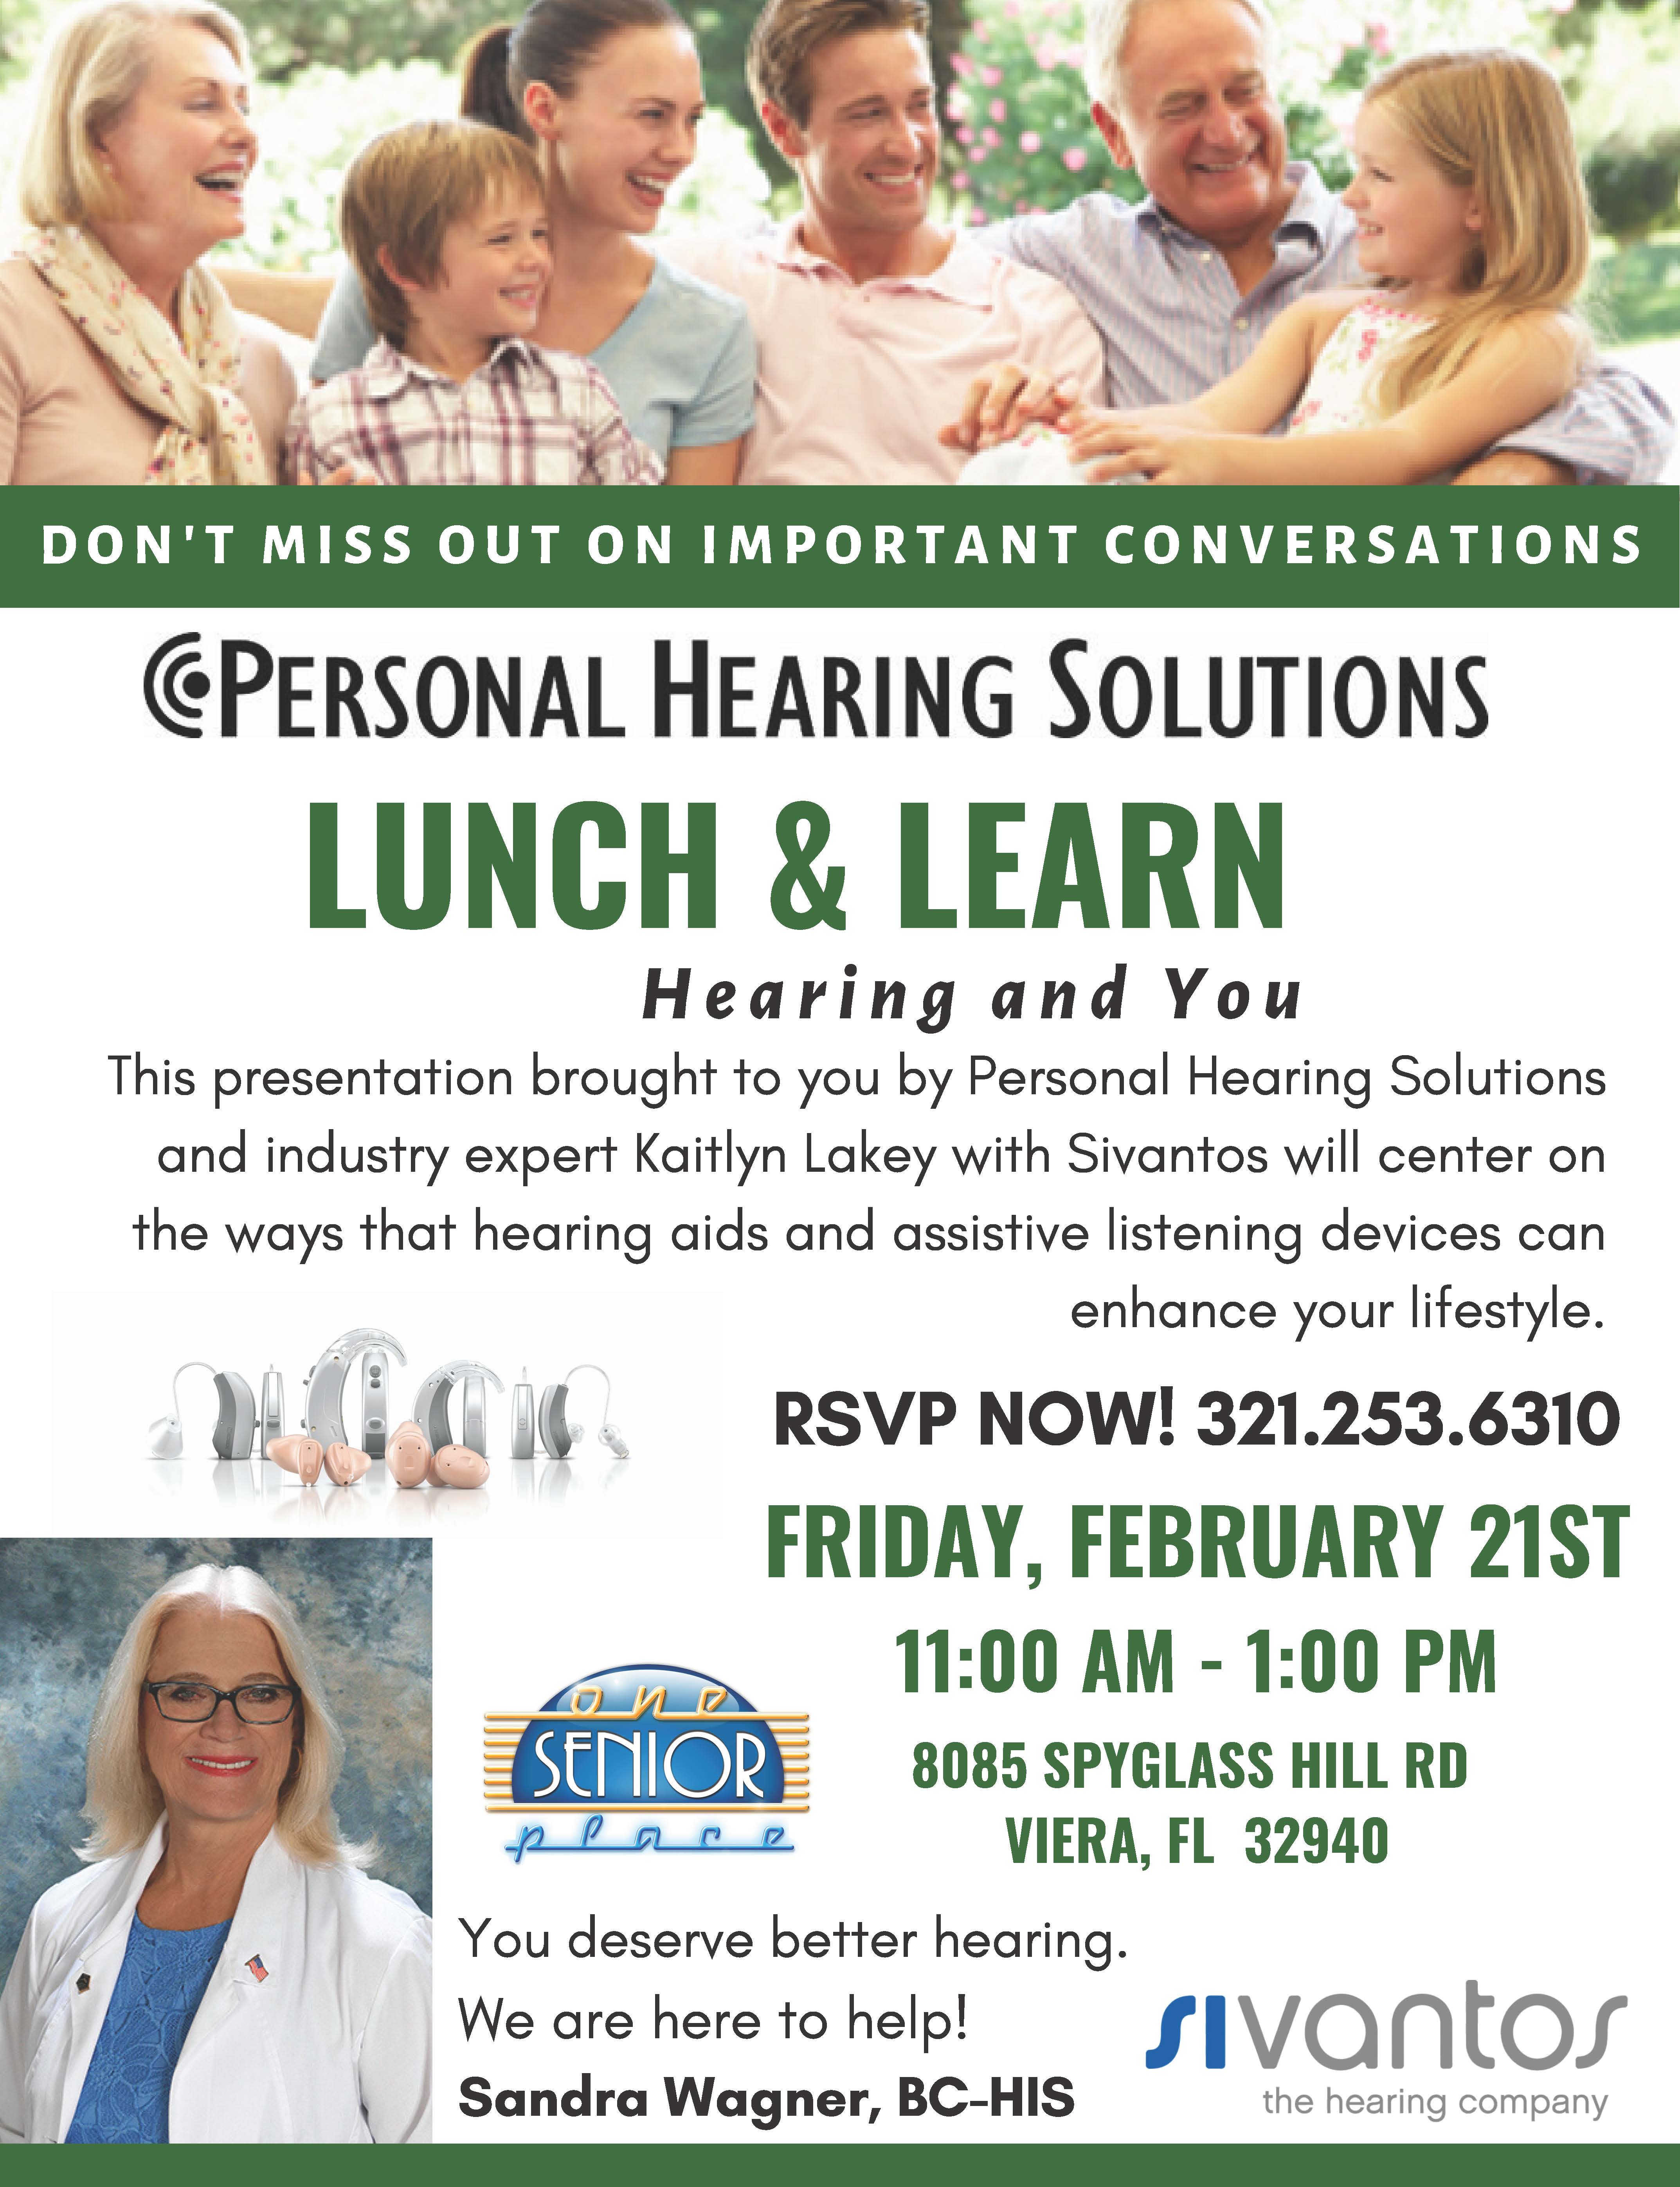 Can You Hear Me Now? Lunch and Learn Seminar presented by Personal Hearing Solutions